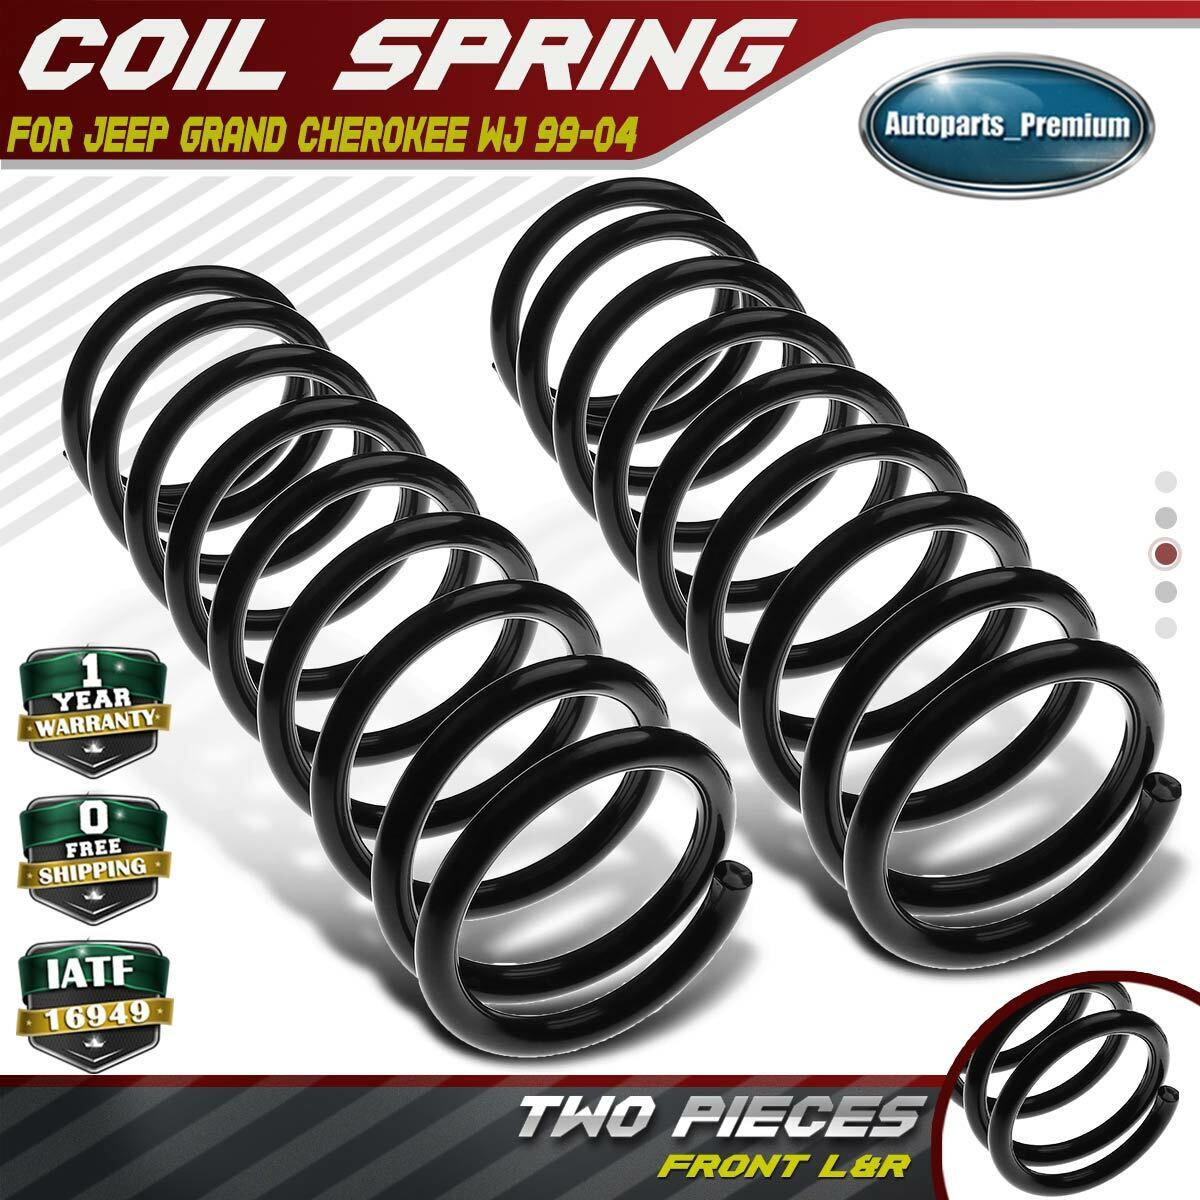 2pcs Front Left & Right Suspension Coil Springs for Jeep Grand Cherokee WJ 99-04